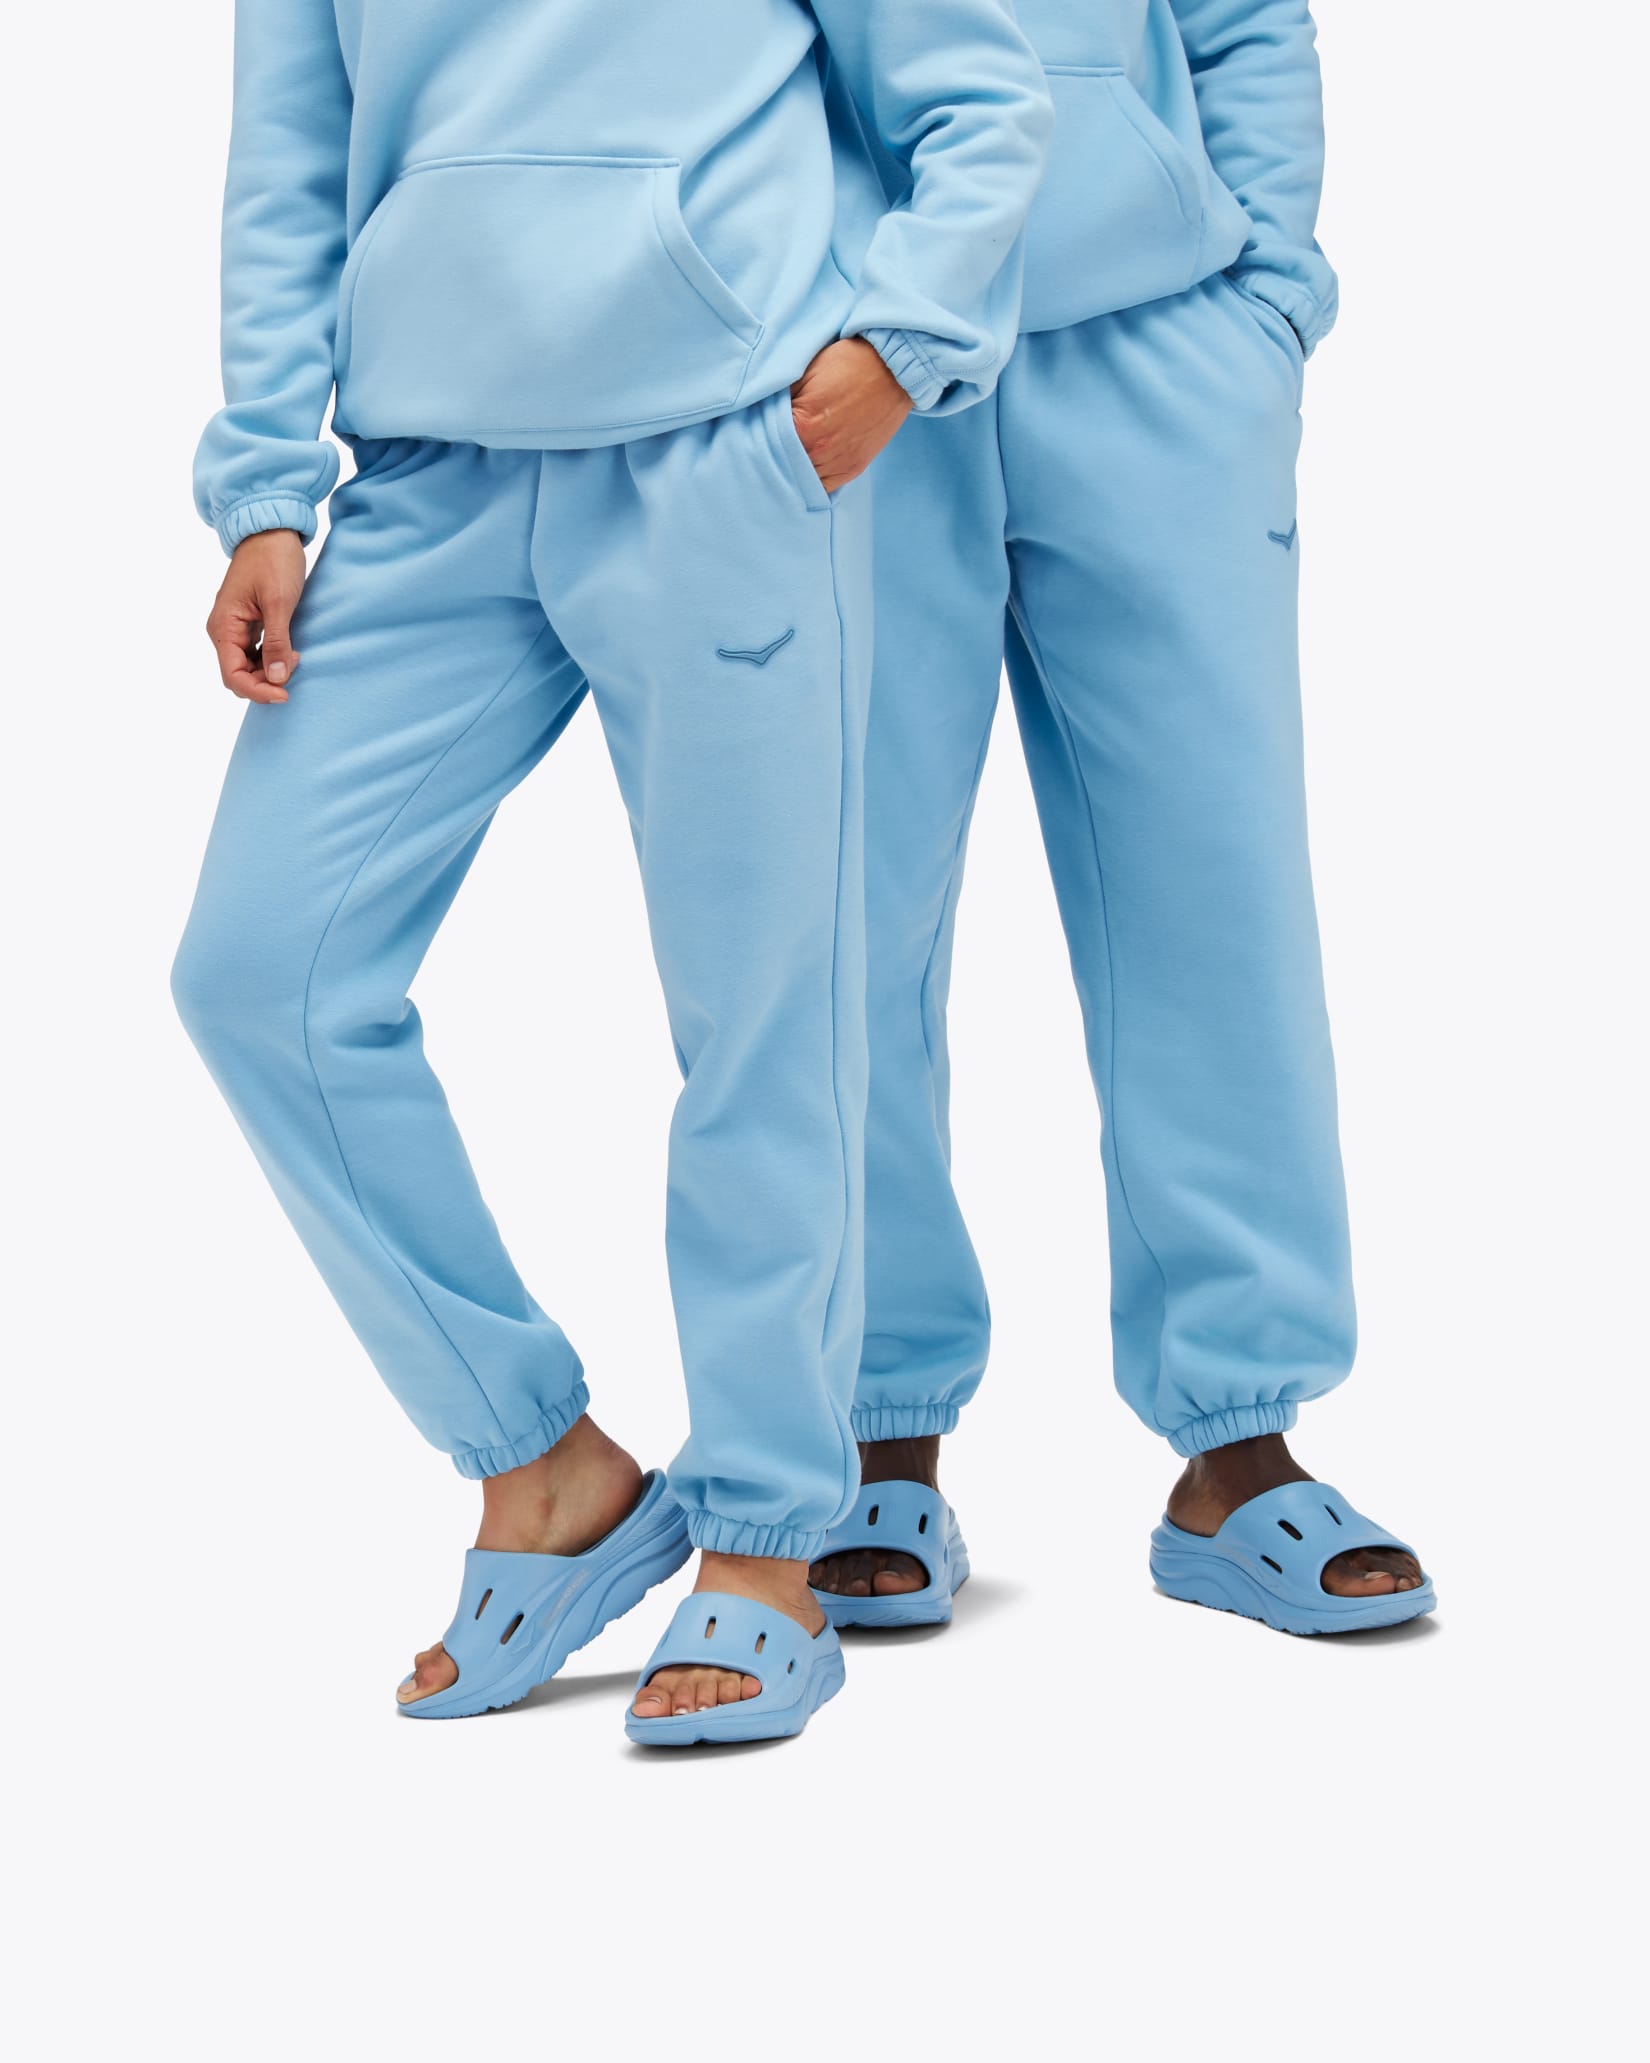 Men's Recovery Jogger